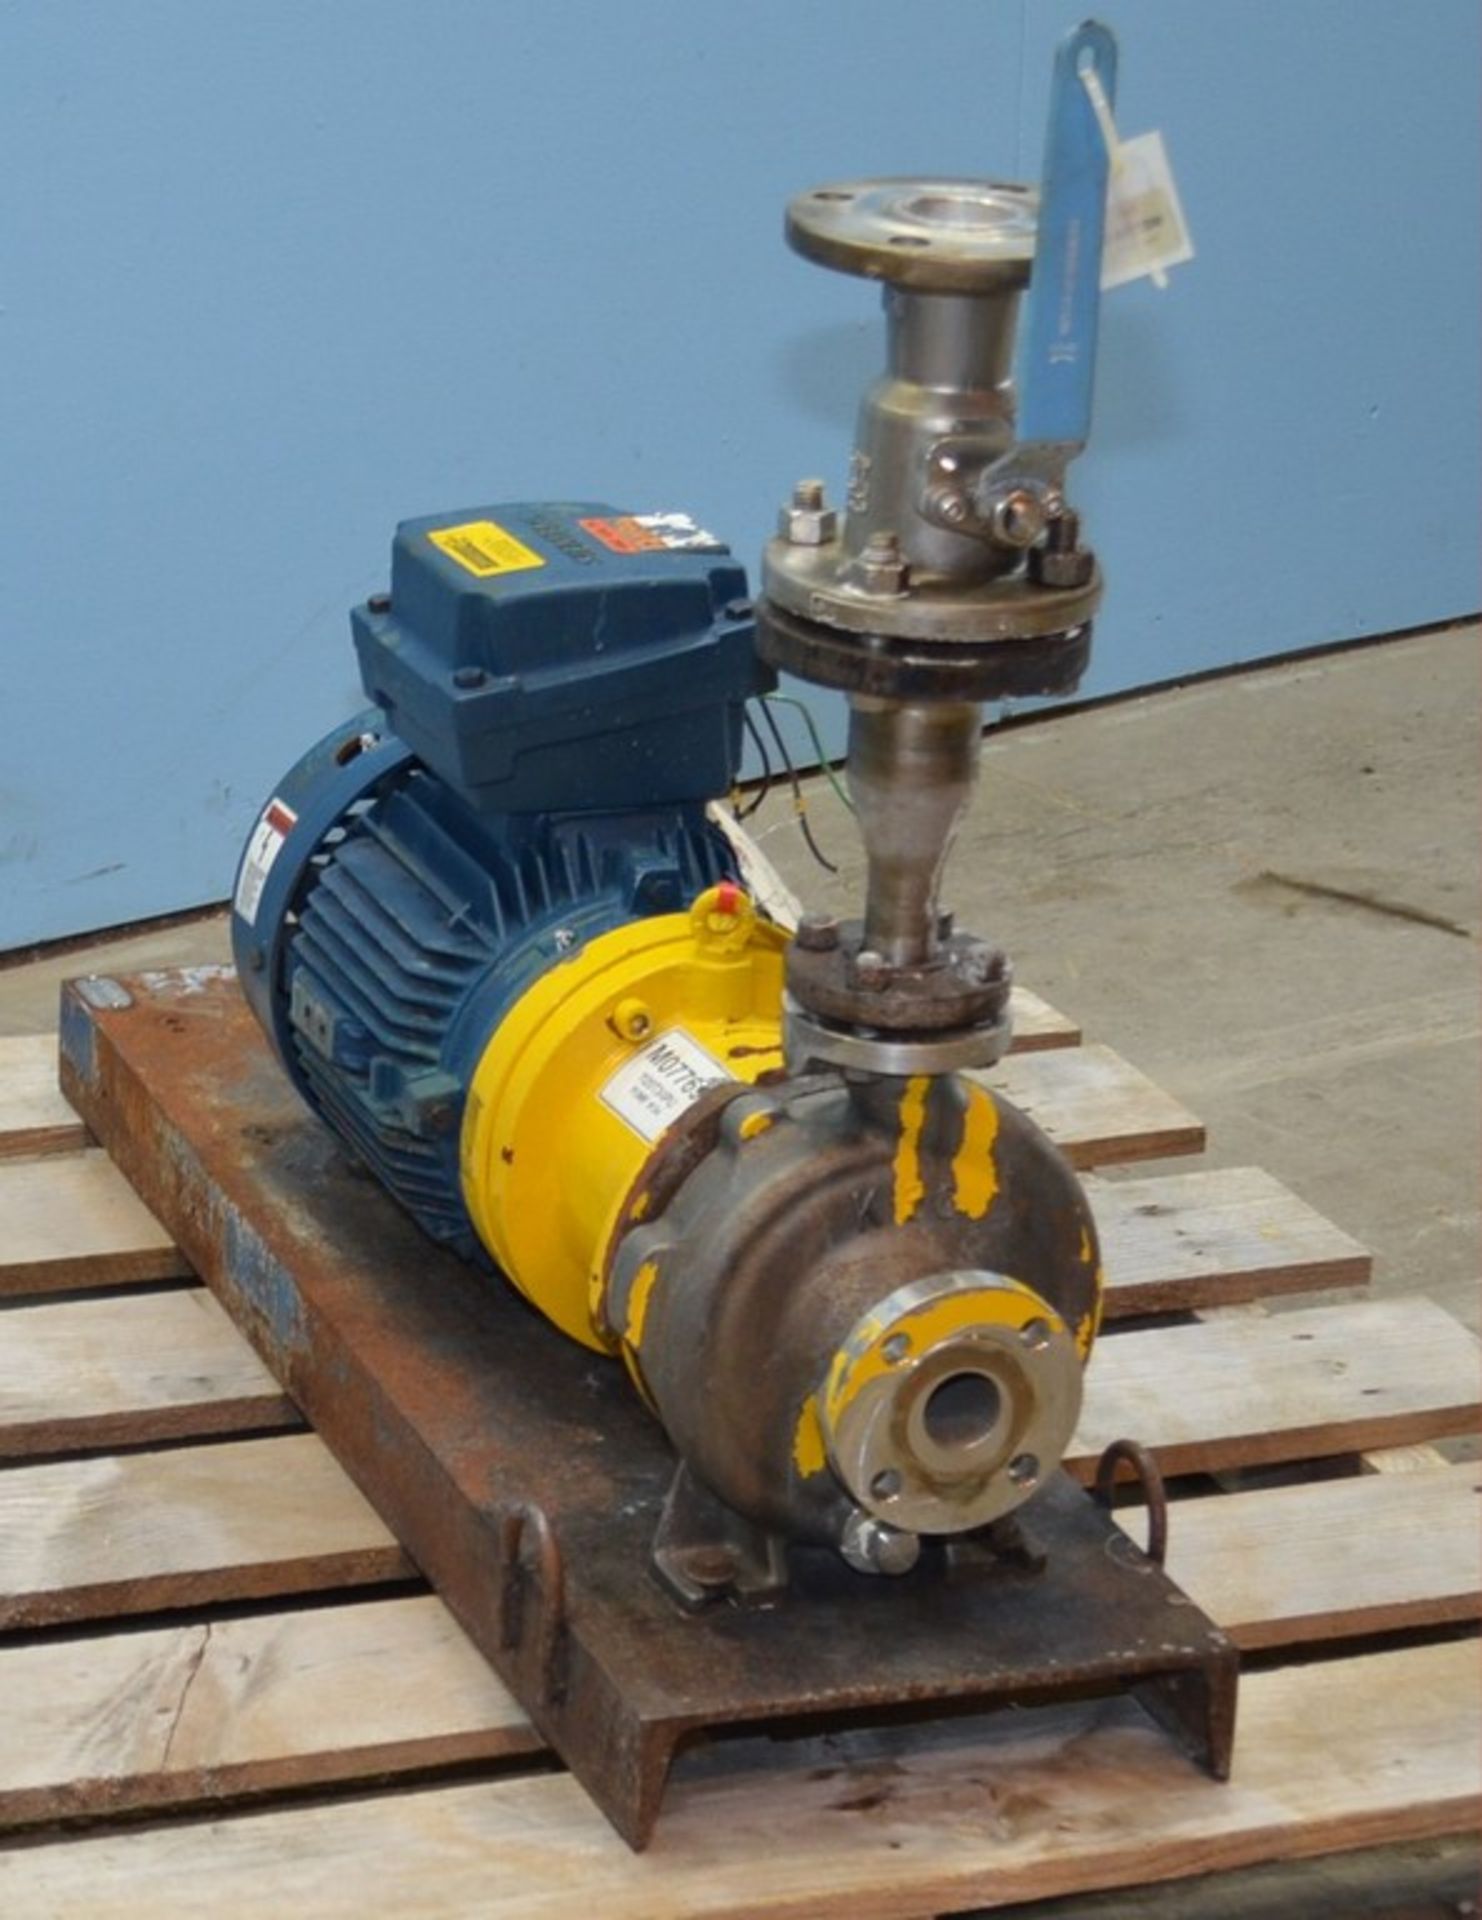 Kontro GSA 7.5 HP 316 S/S Centrifugal Pump. Size 1.5 x 1 x 6. Approximately 60 Gallons Per Minute at - Image 2 of 7